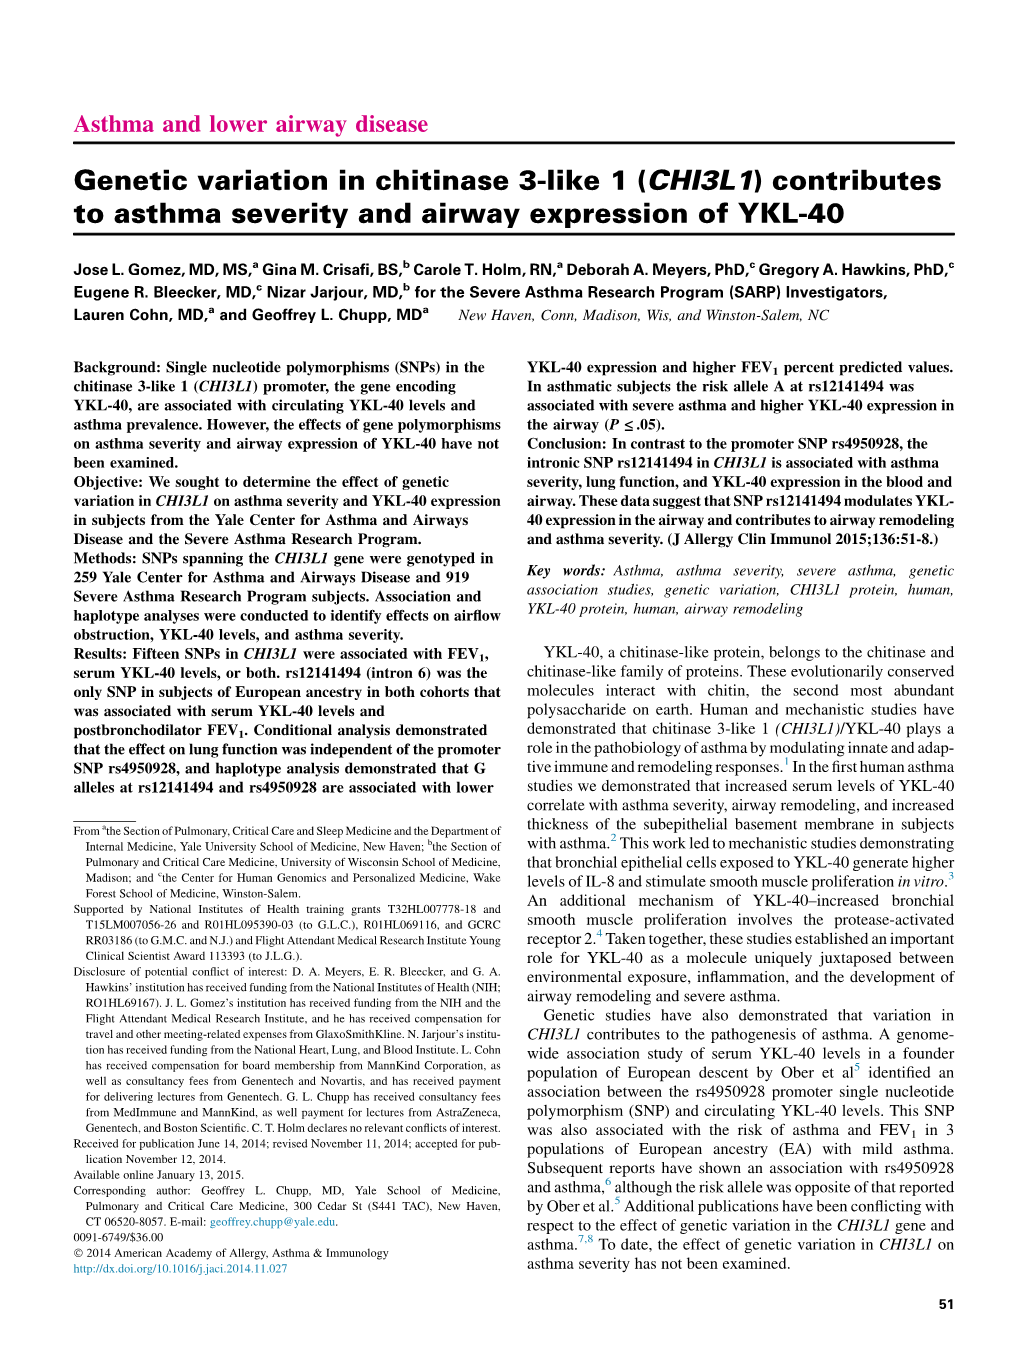 Genetic Variation in Chitinase 3-Like 1 (CHI3L1) Contributes to Asthma Severity and Airway Expression of YKL-40